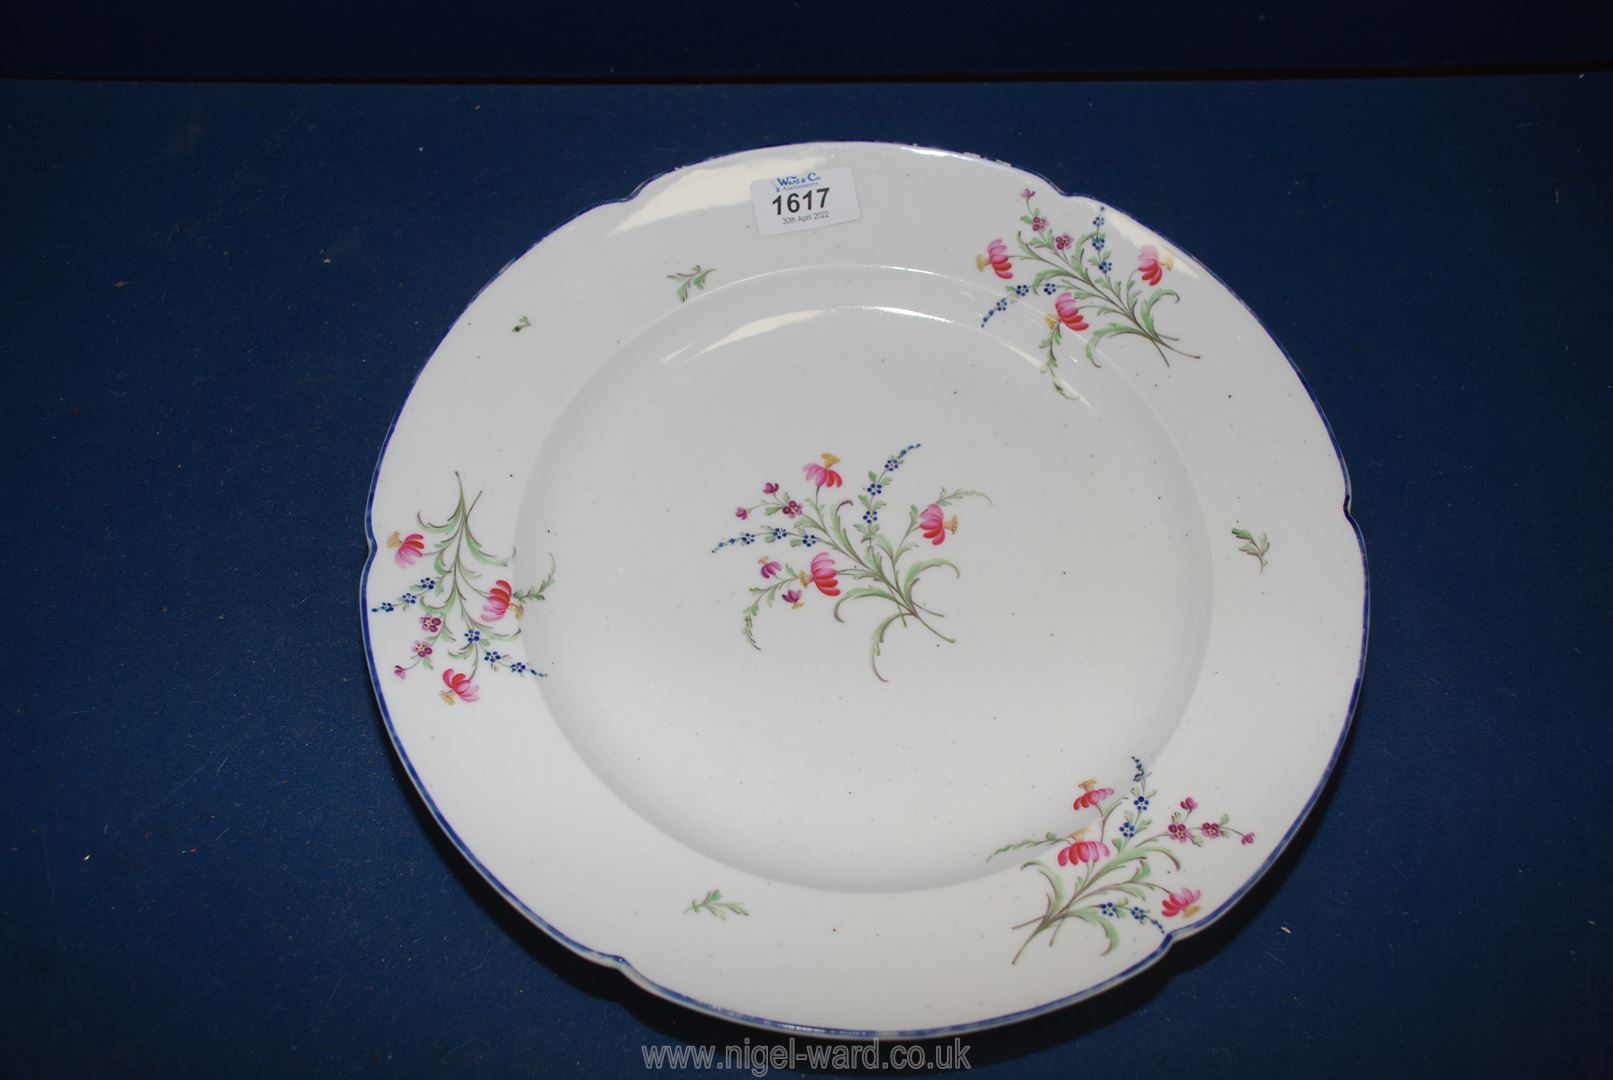 A French Niderviller porcelain 13" charger circa 1790, in nice condition, marked on the base.